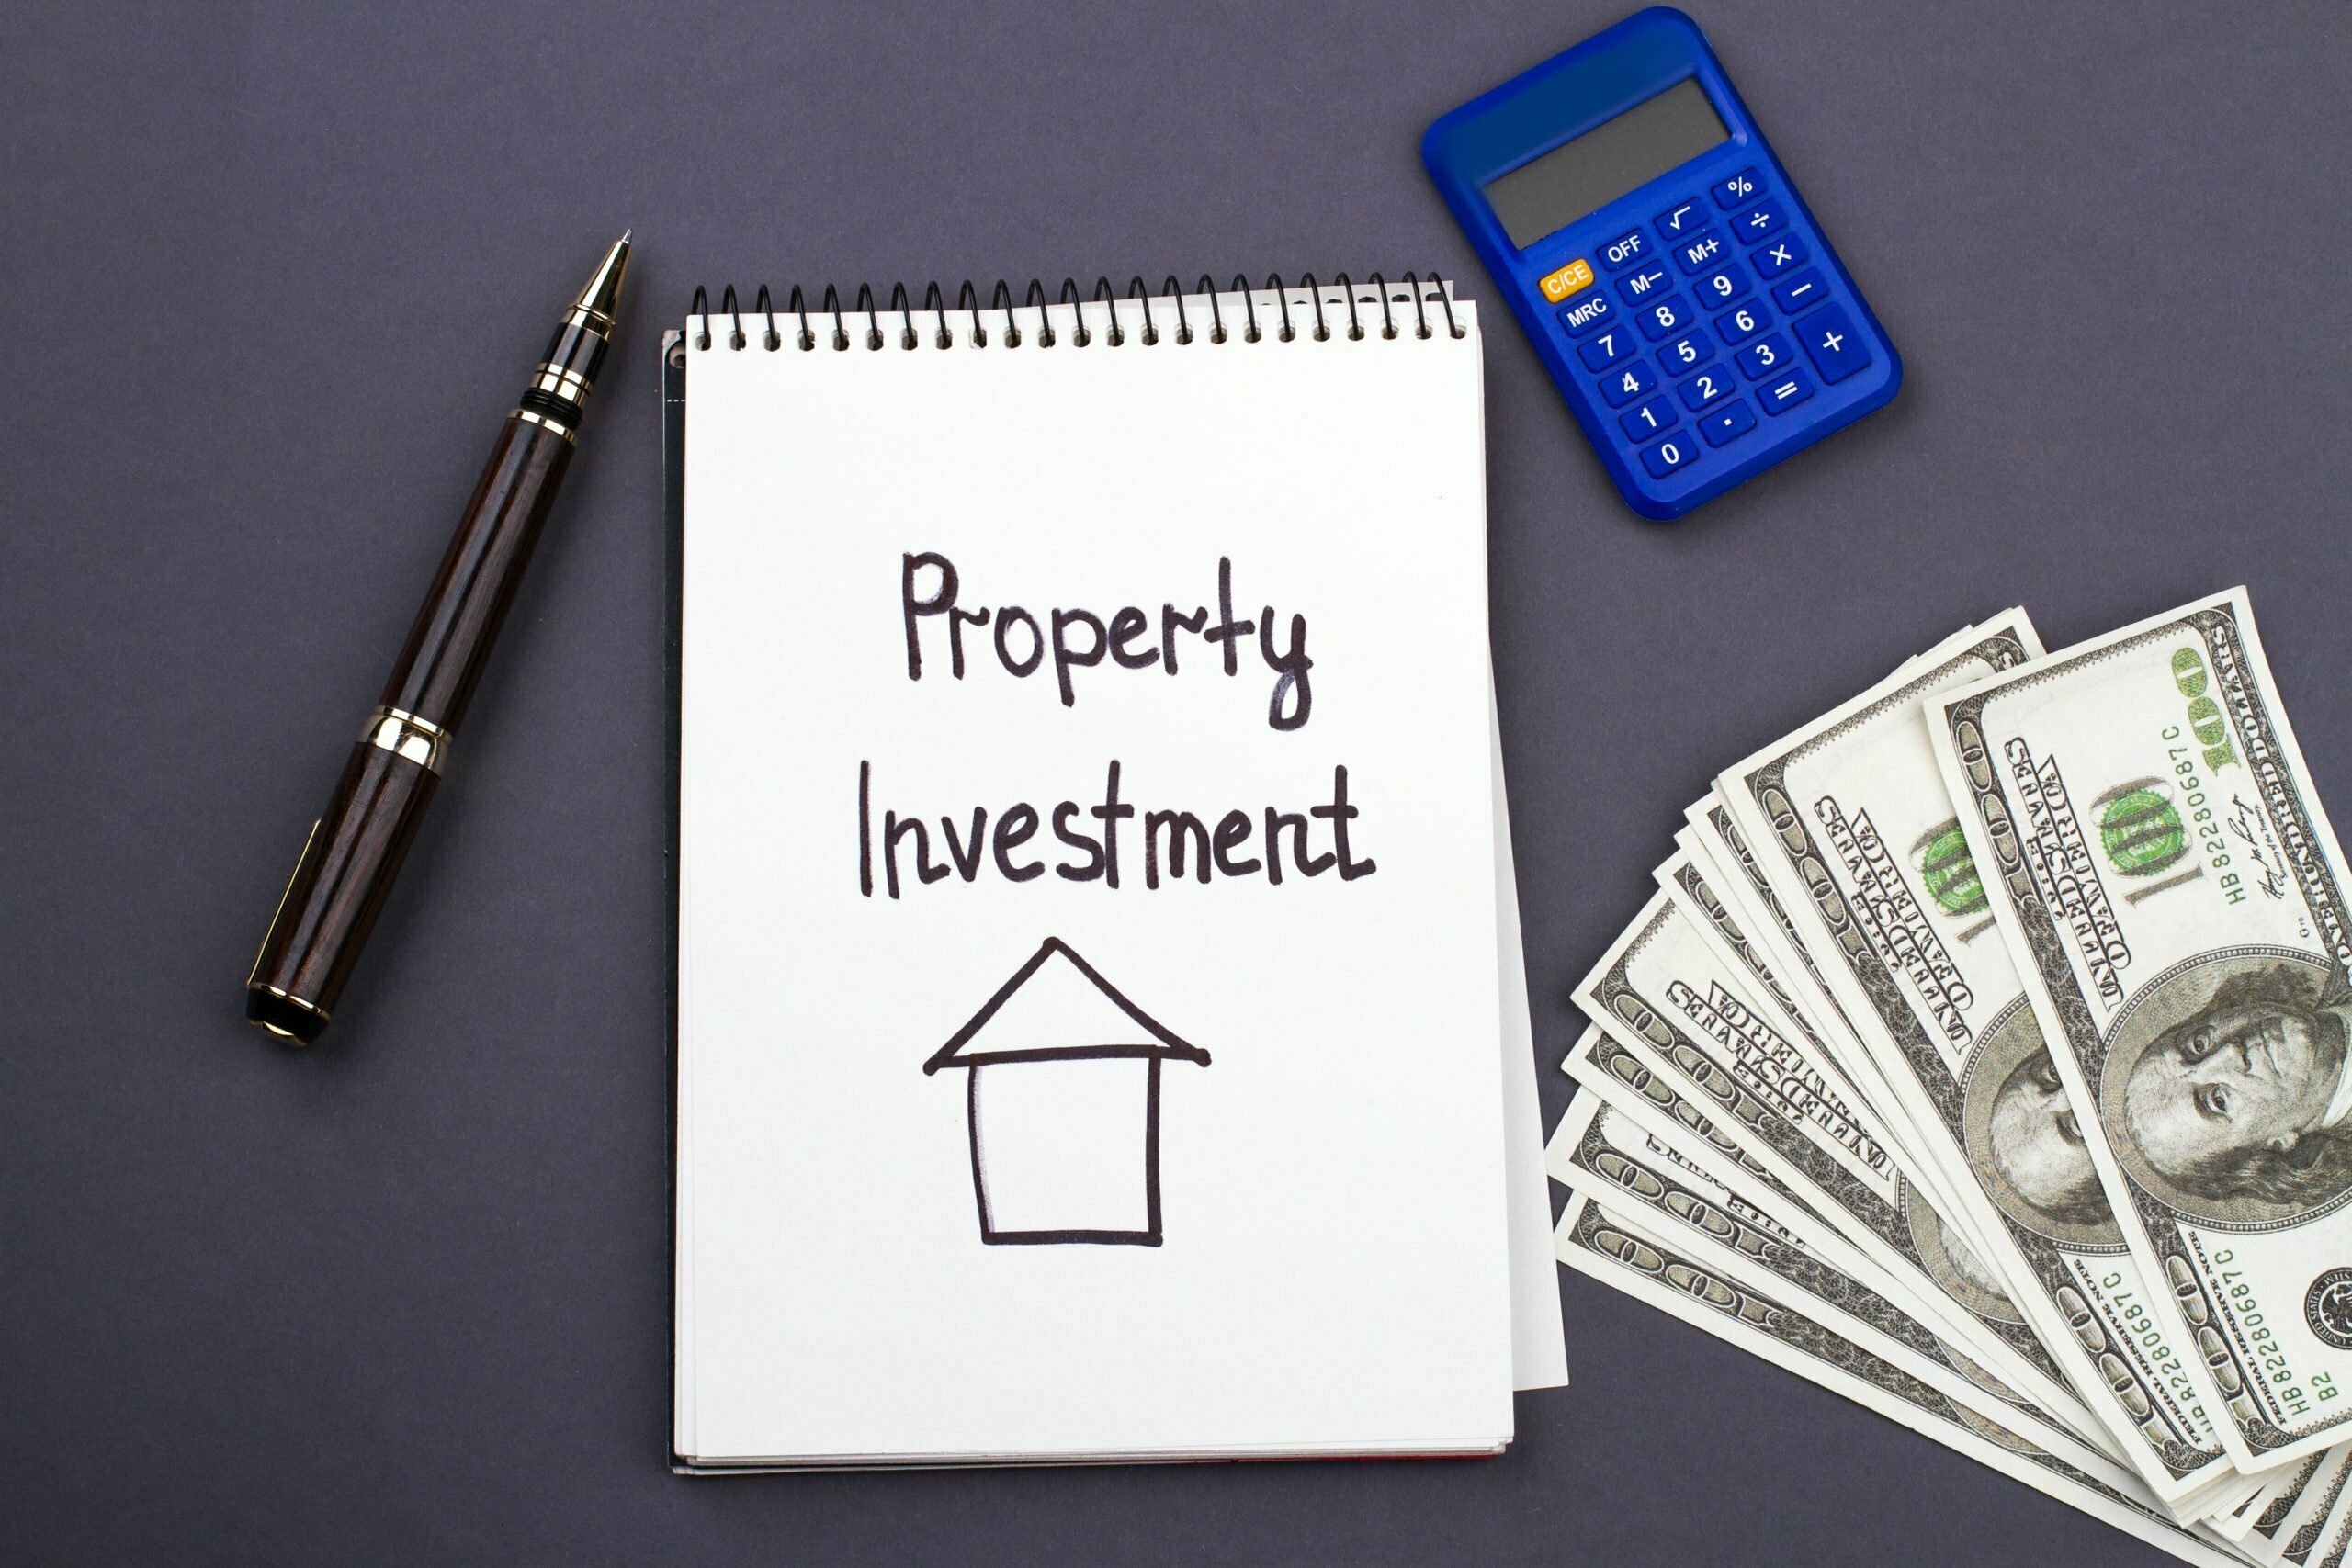 Real Estate Investments scaled